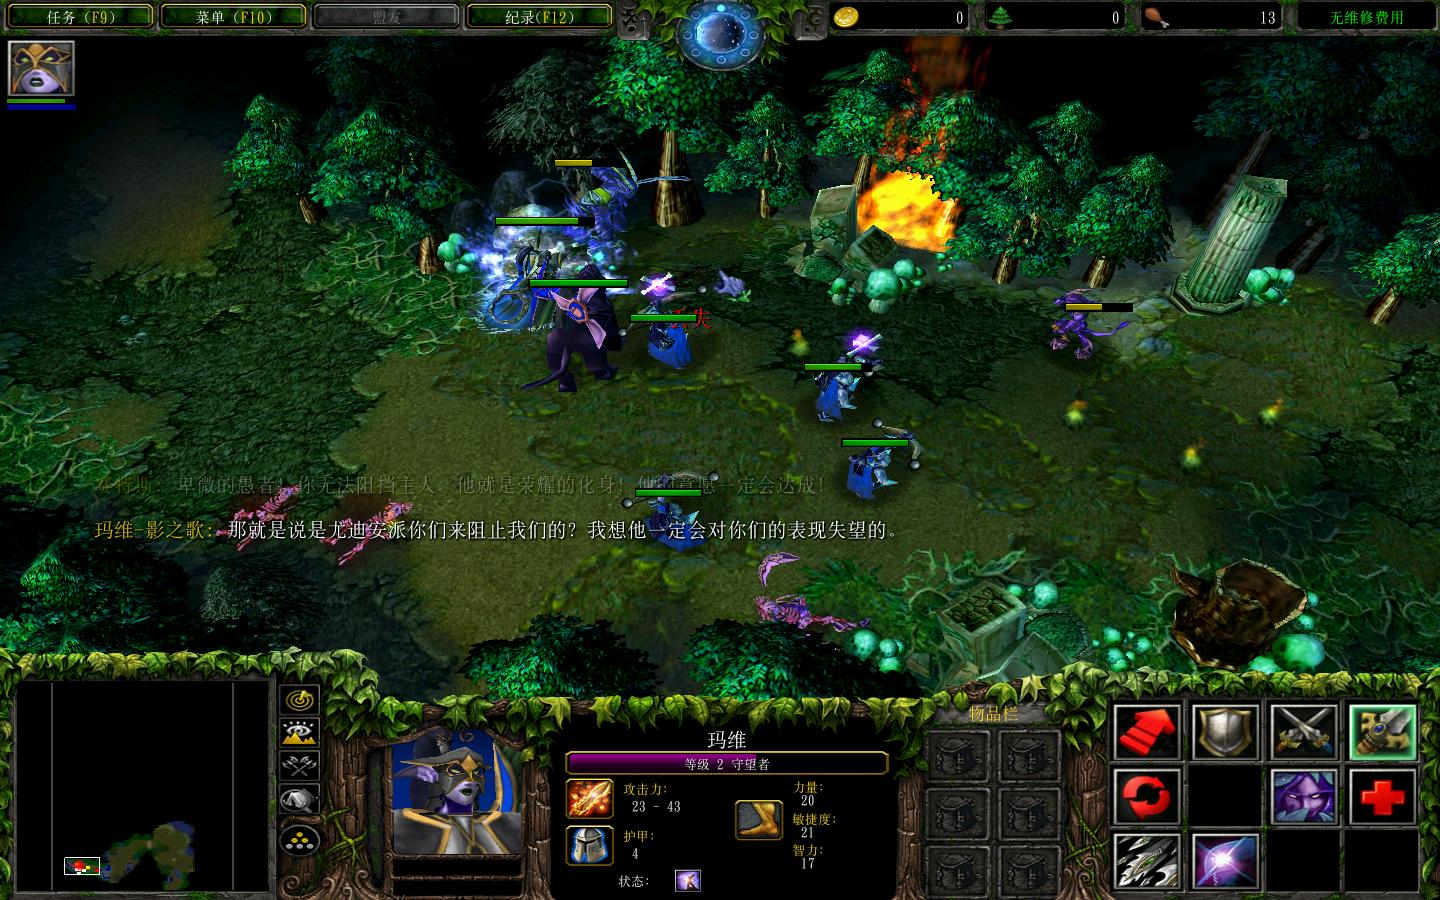 ħ3Warcraft III The Frozen ThroneV2.3֮ĩ